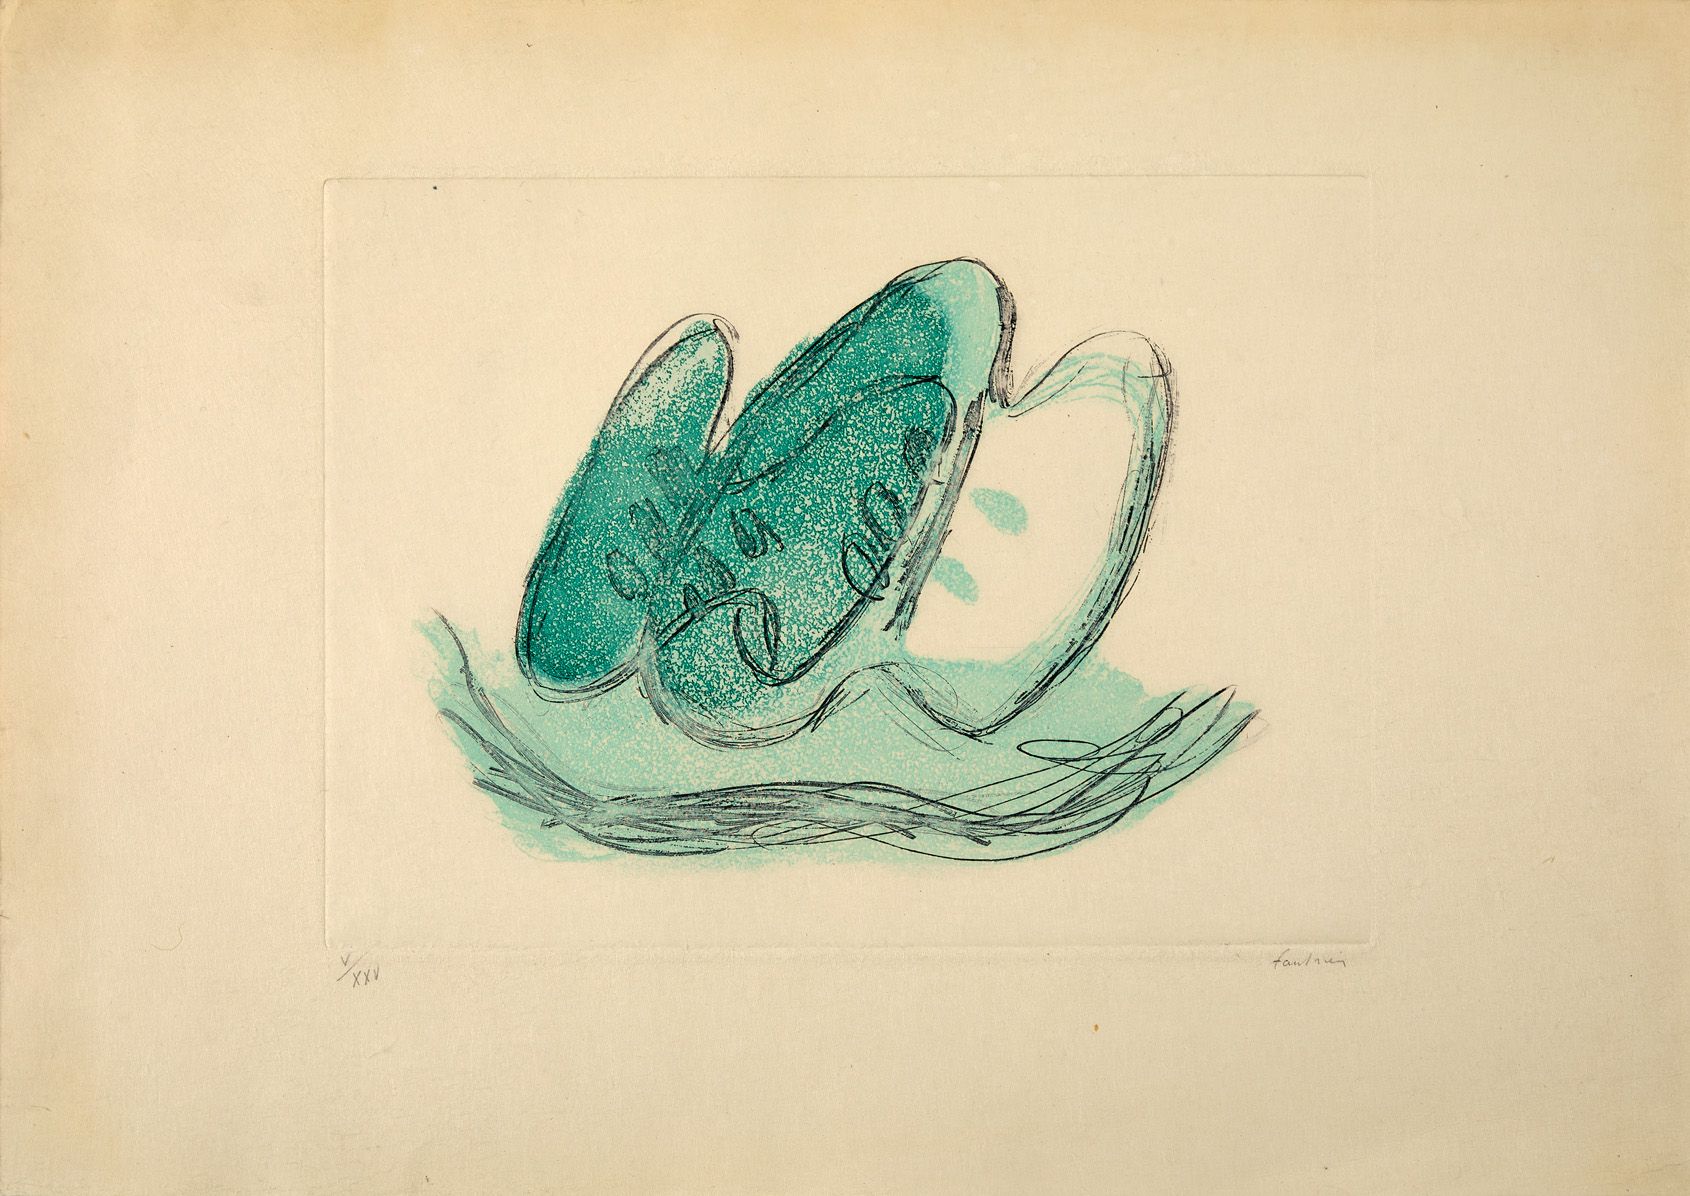 Jean FAUTRIER Jean FAUTRIER (1898 - 1964)

The Fruits

Etching in colors on old &hellip;